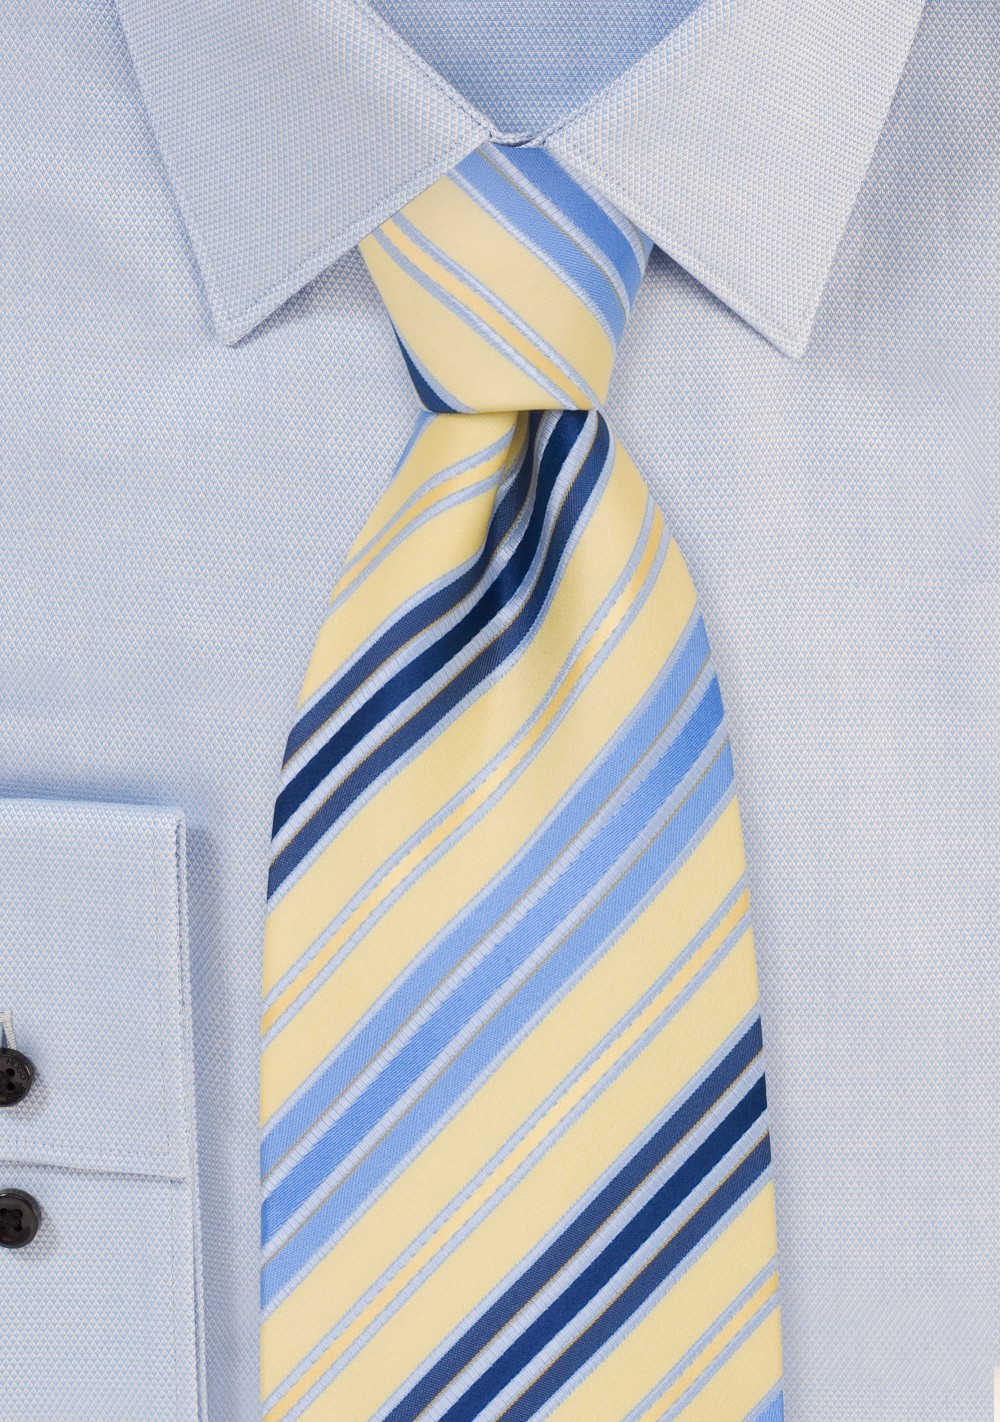 Striped Mens Ties - Navy, Light Blue, and Yellow Necktie